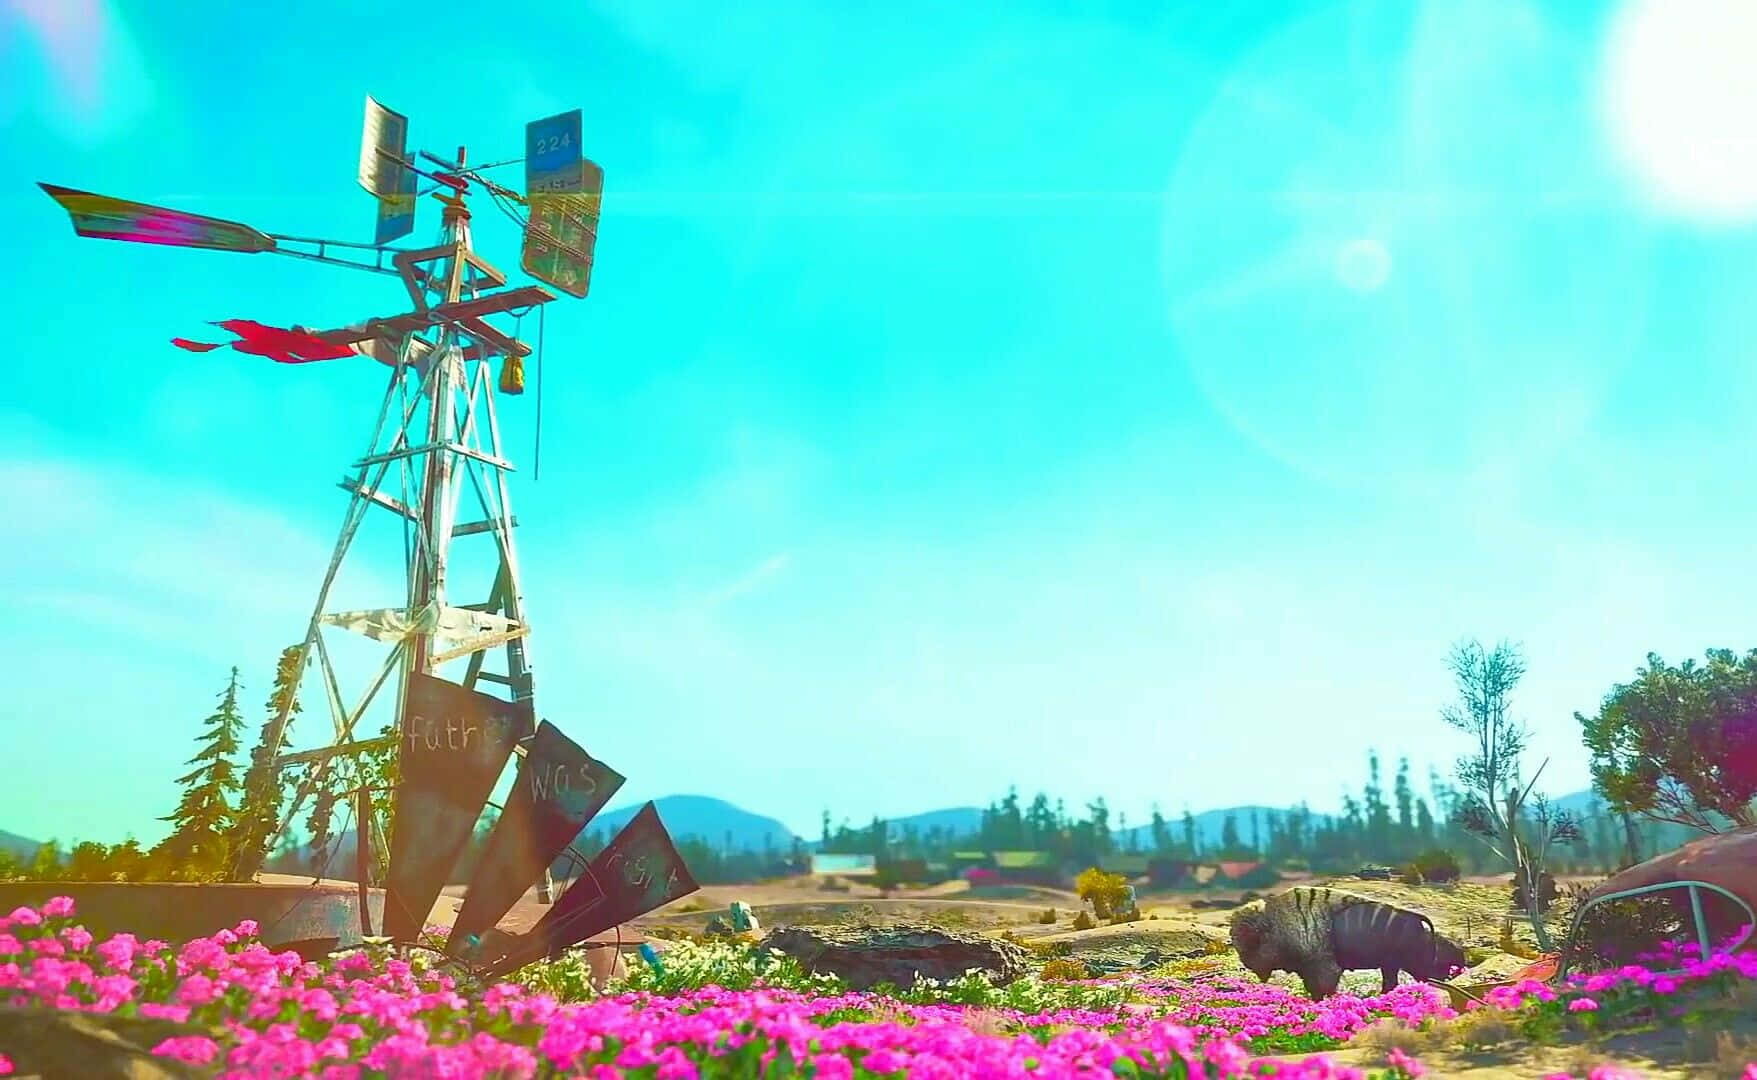 A Windmill In The Middle Of A Field Of Flowers